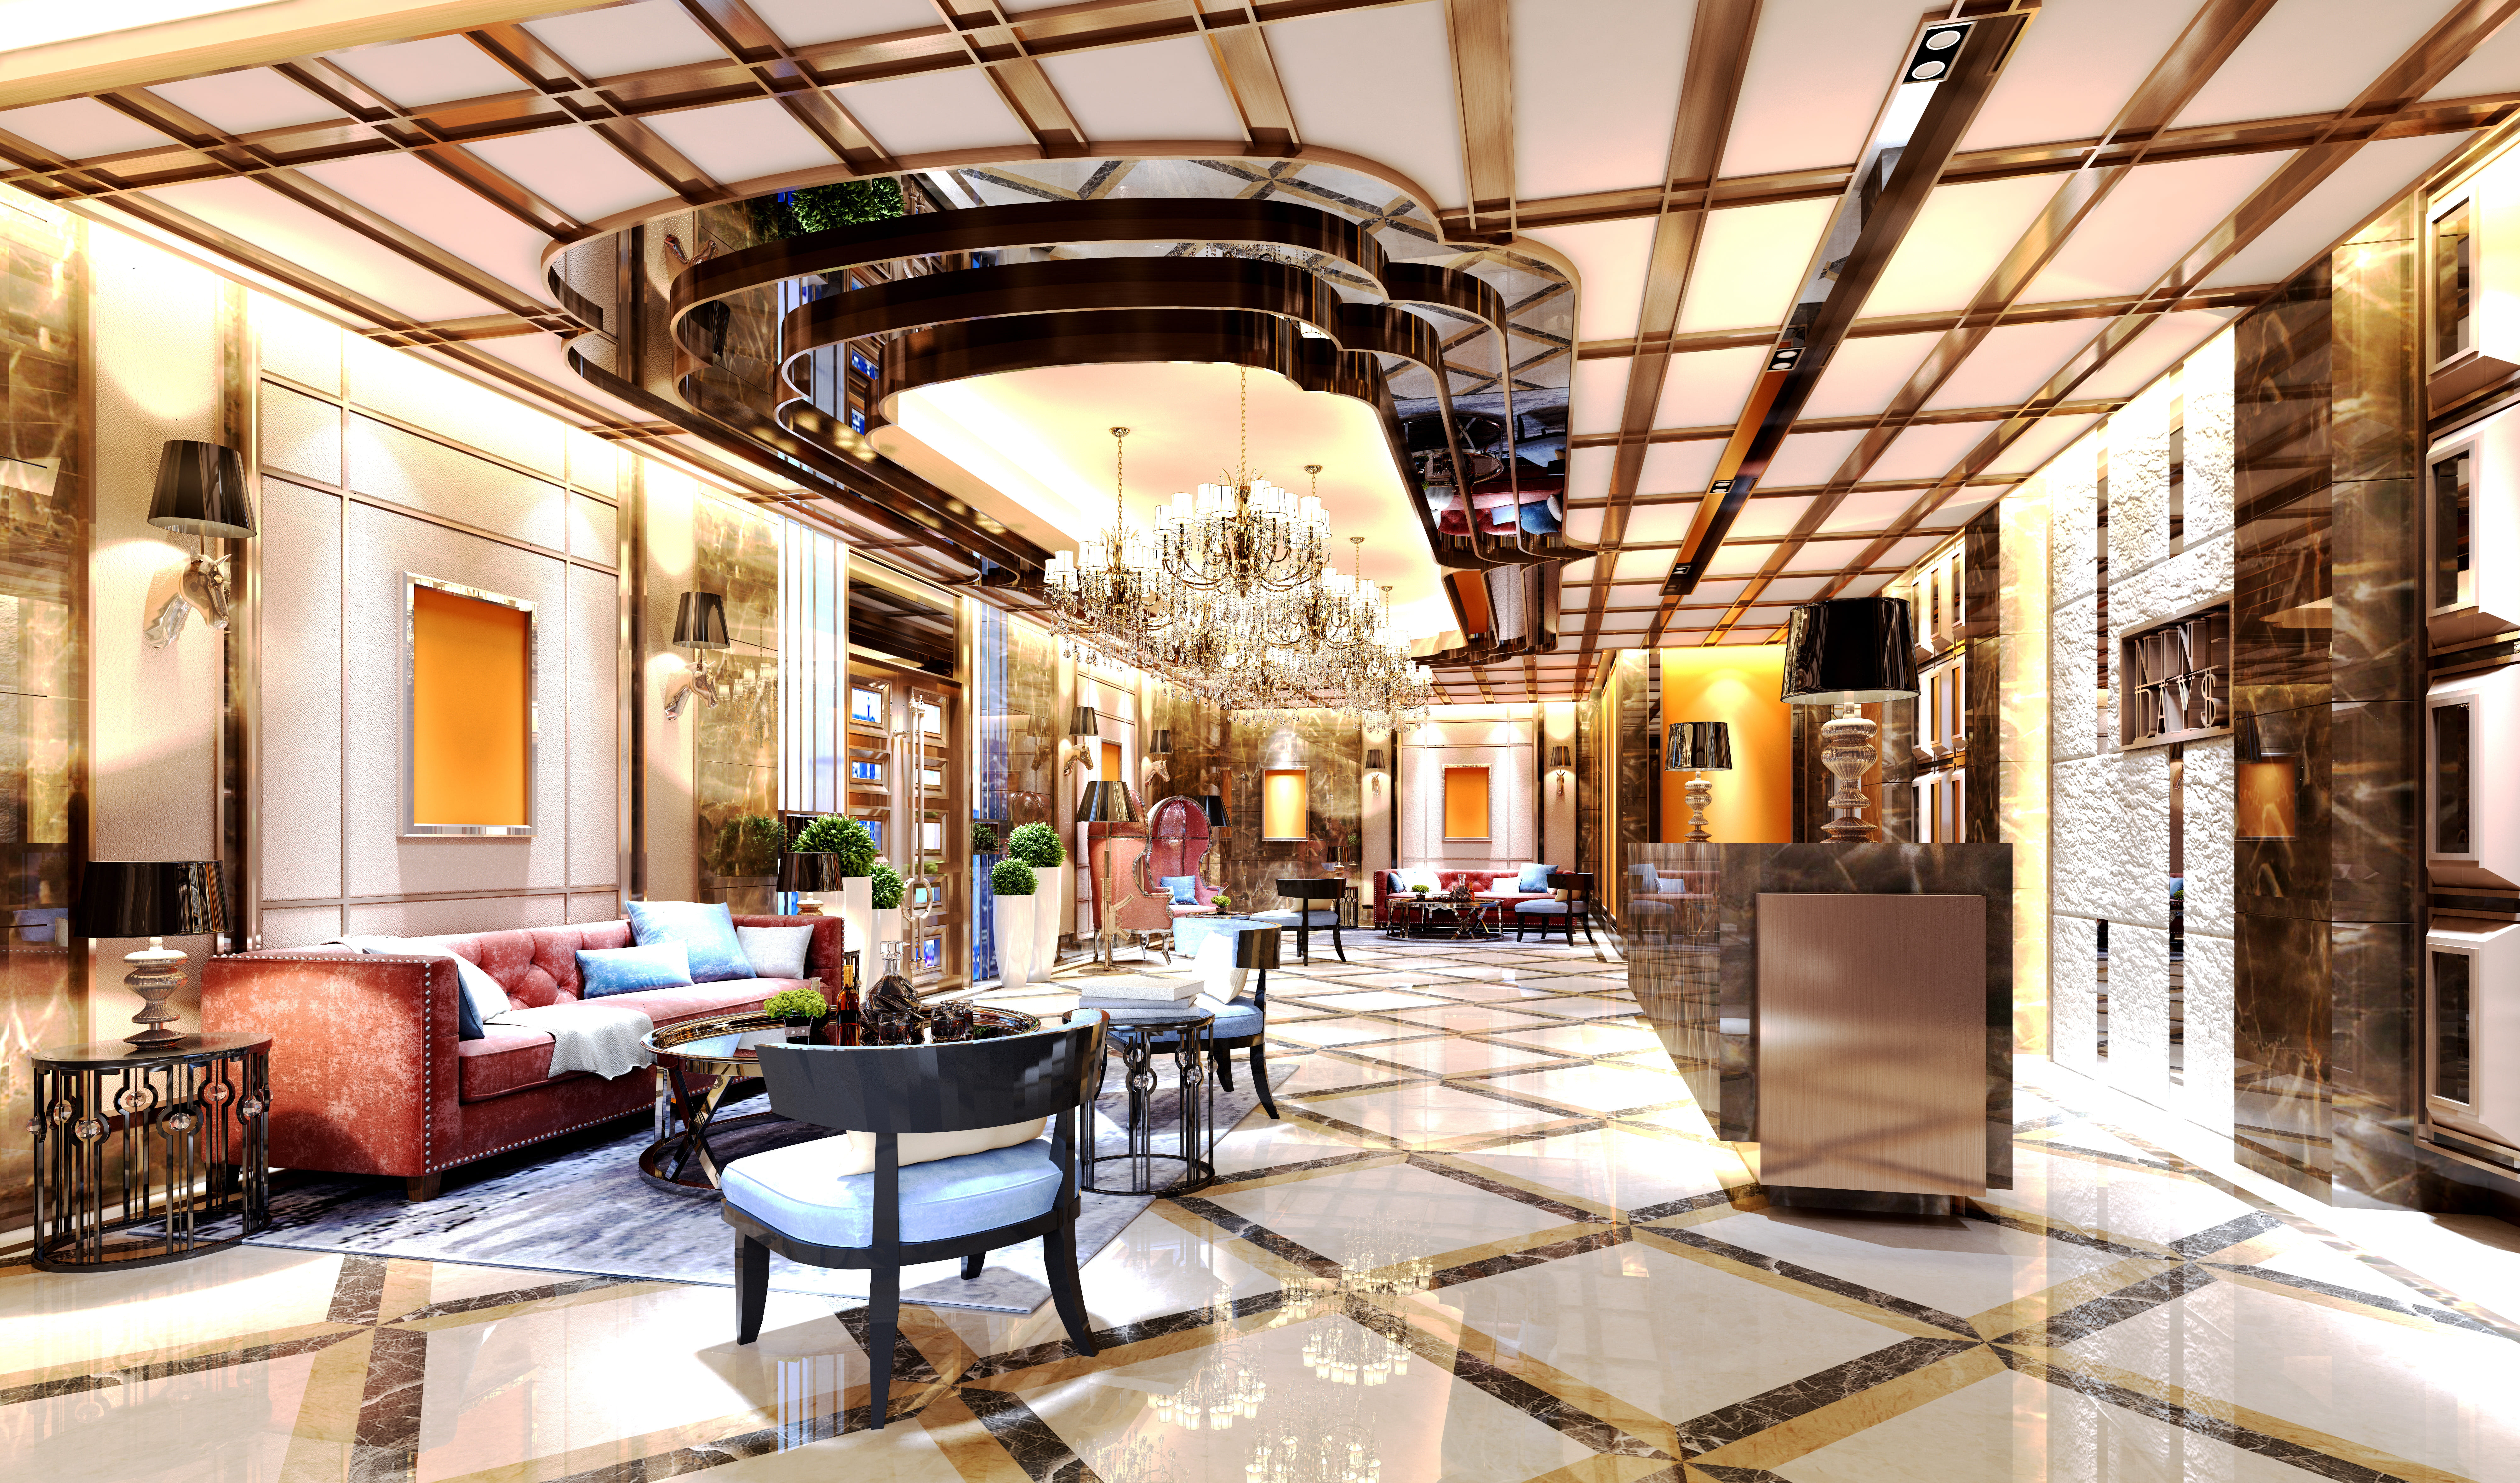 Lobby of a luxurious hotel | Source: Shutterstock